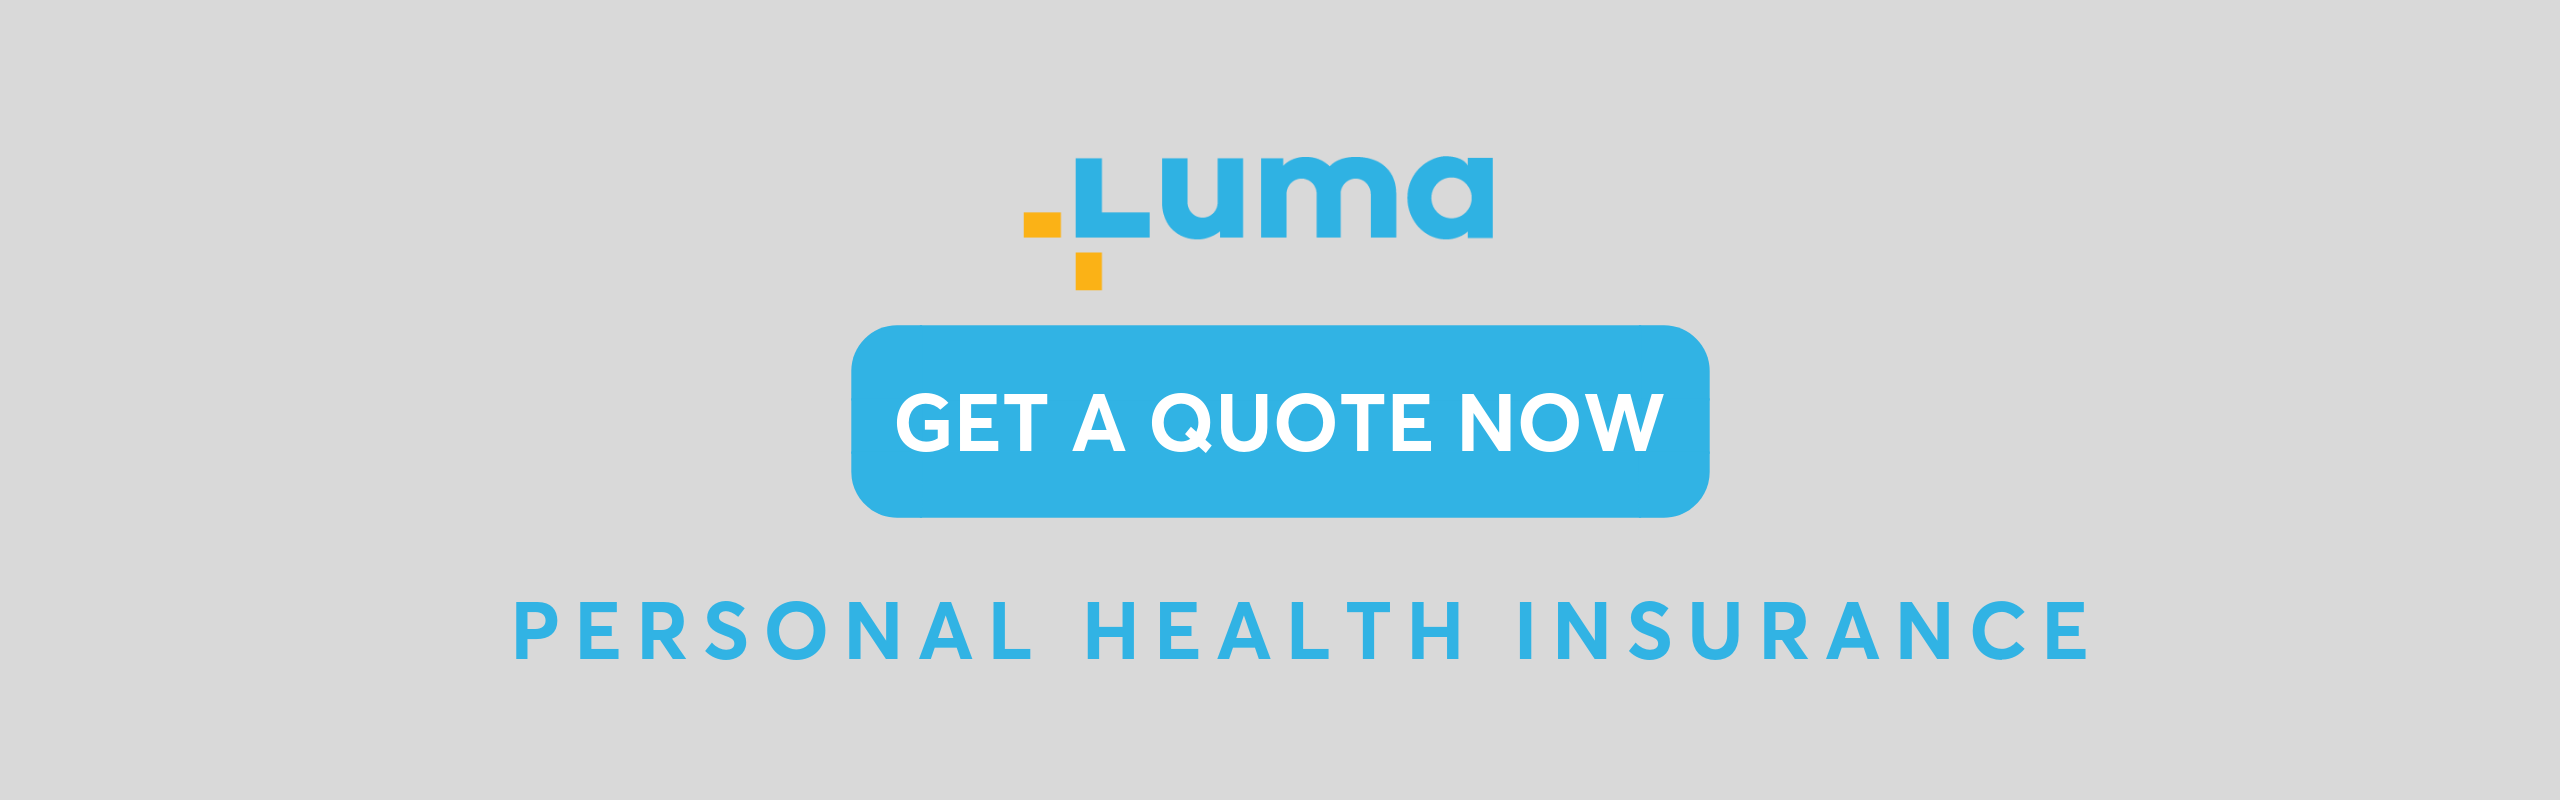 Get Personal Health Insurance